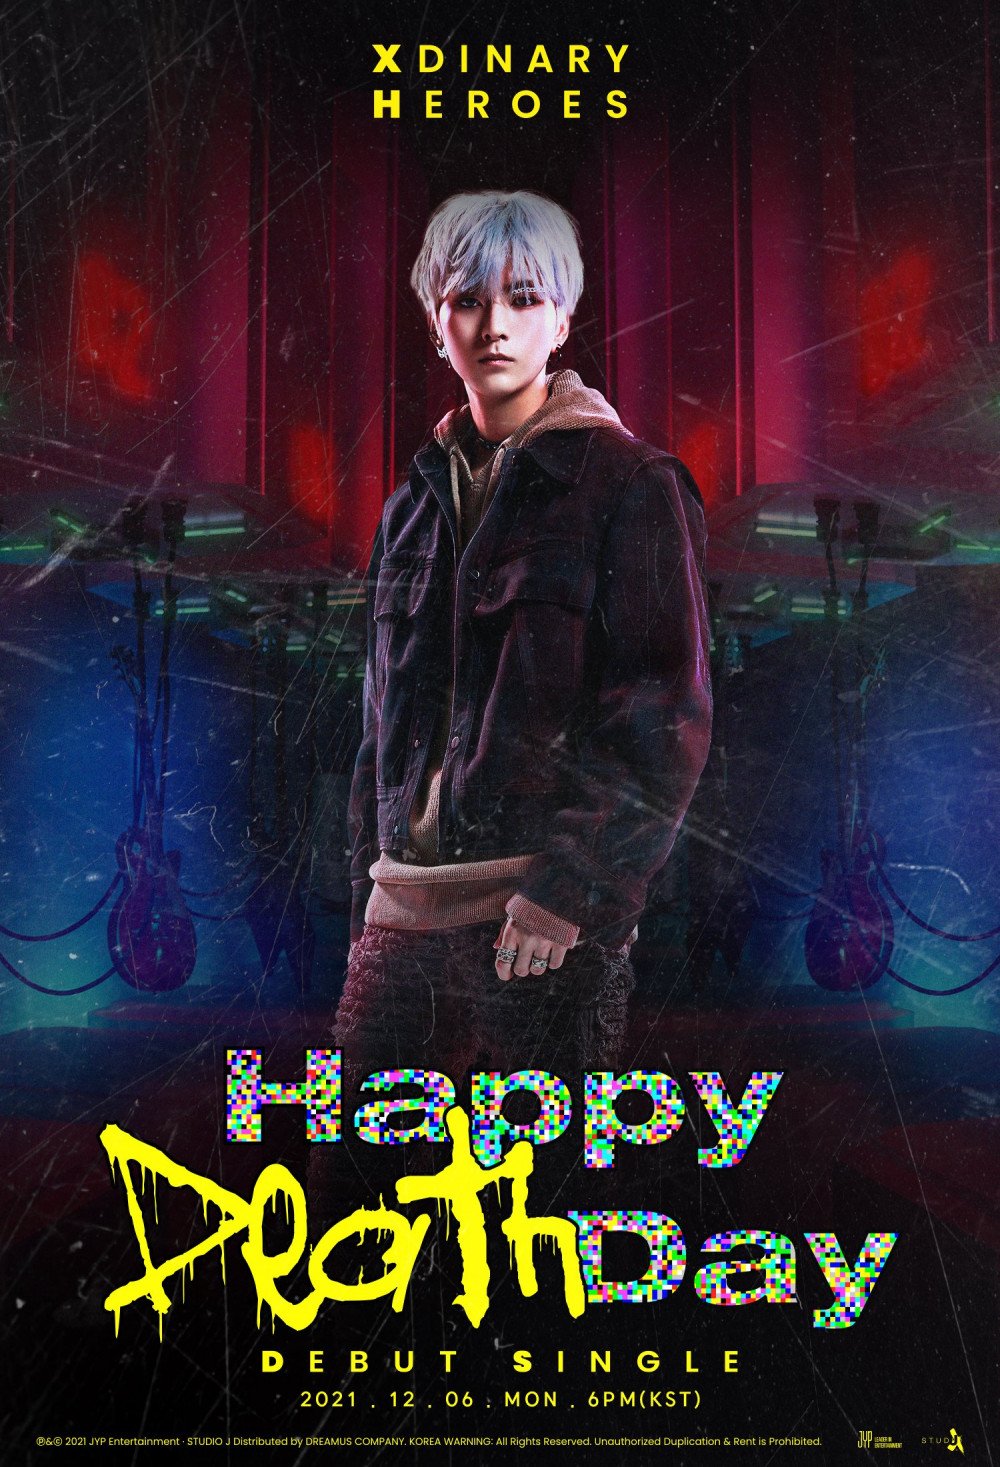 O.de from JYP's upcoming band Xdinary Heroes' shows an edgy style in concept photo for debut single 'Happy Death Day'